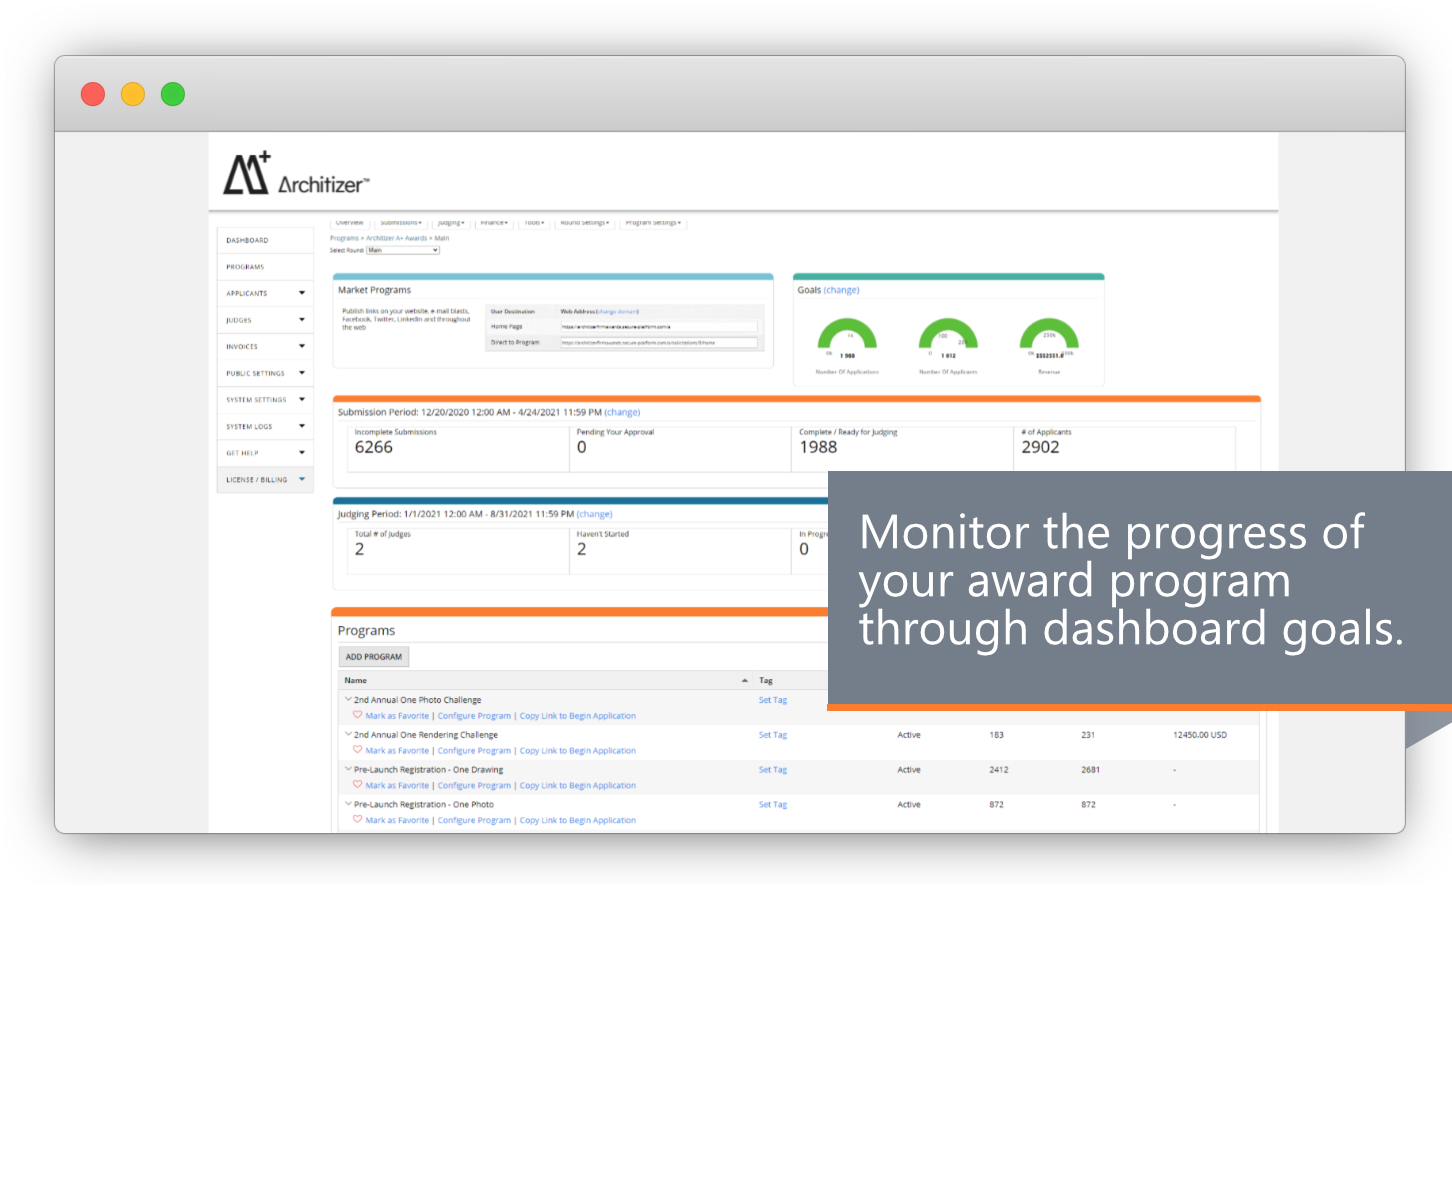 Monitor the progress of your program throughout the application cycle with dashboard goals. Monitor incoming revenue from entrants to ensure a profitable award cycle.